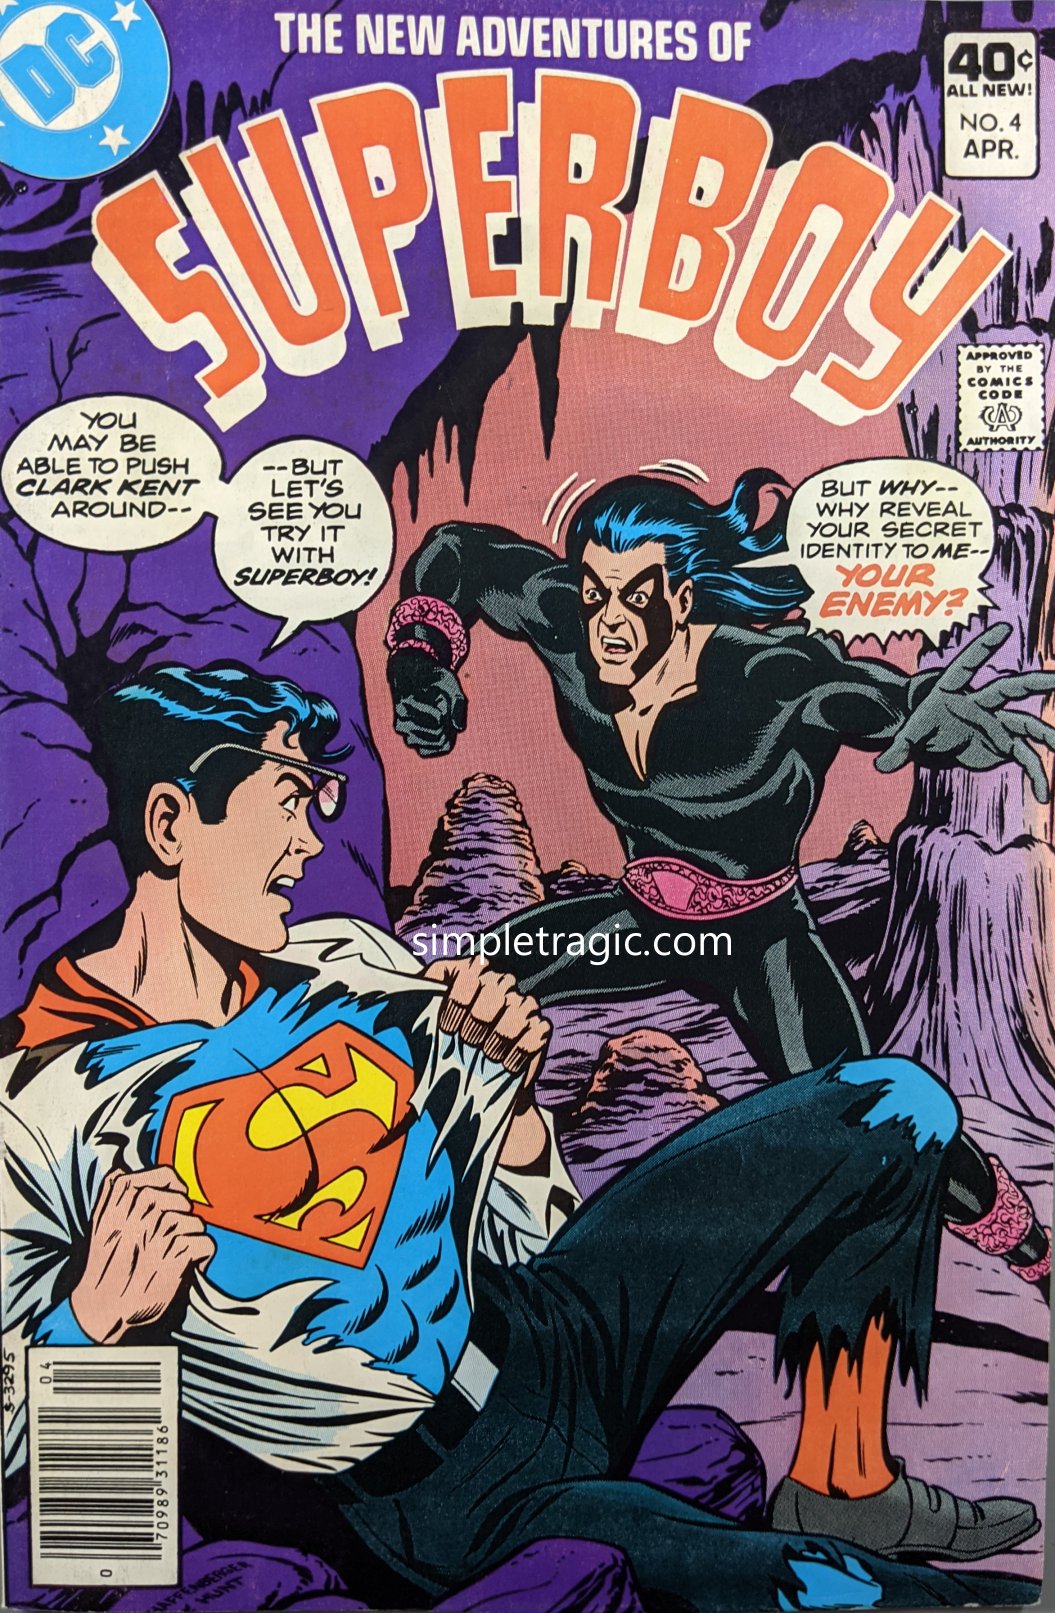 New Adventures Of Superboy #4 Comic Book Cover Art